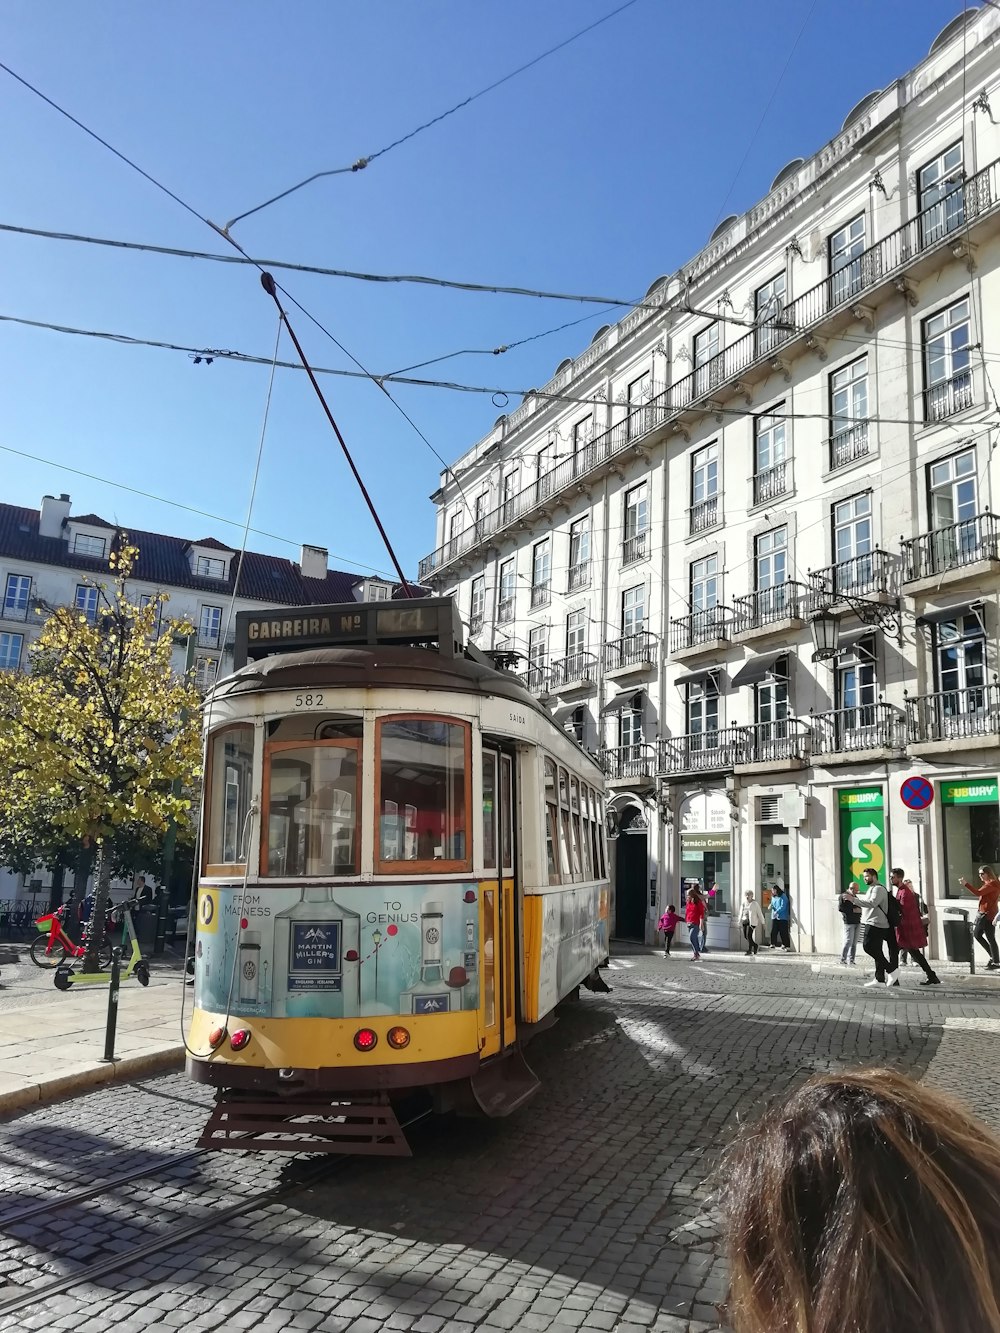 a cable car on a street in a city